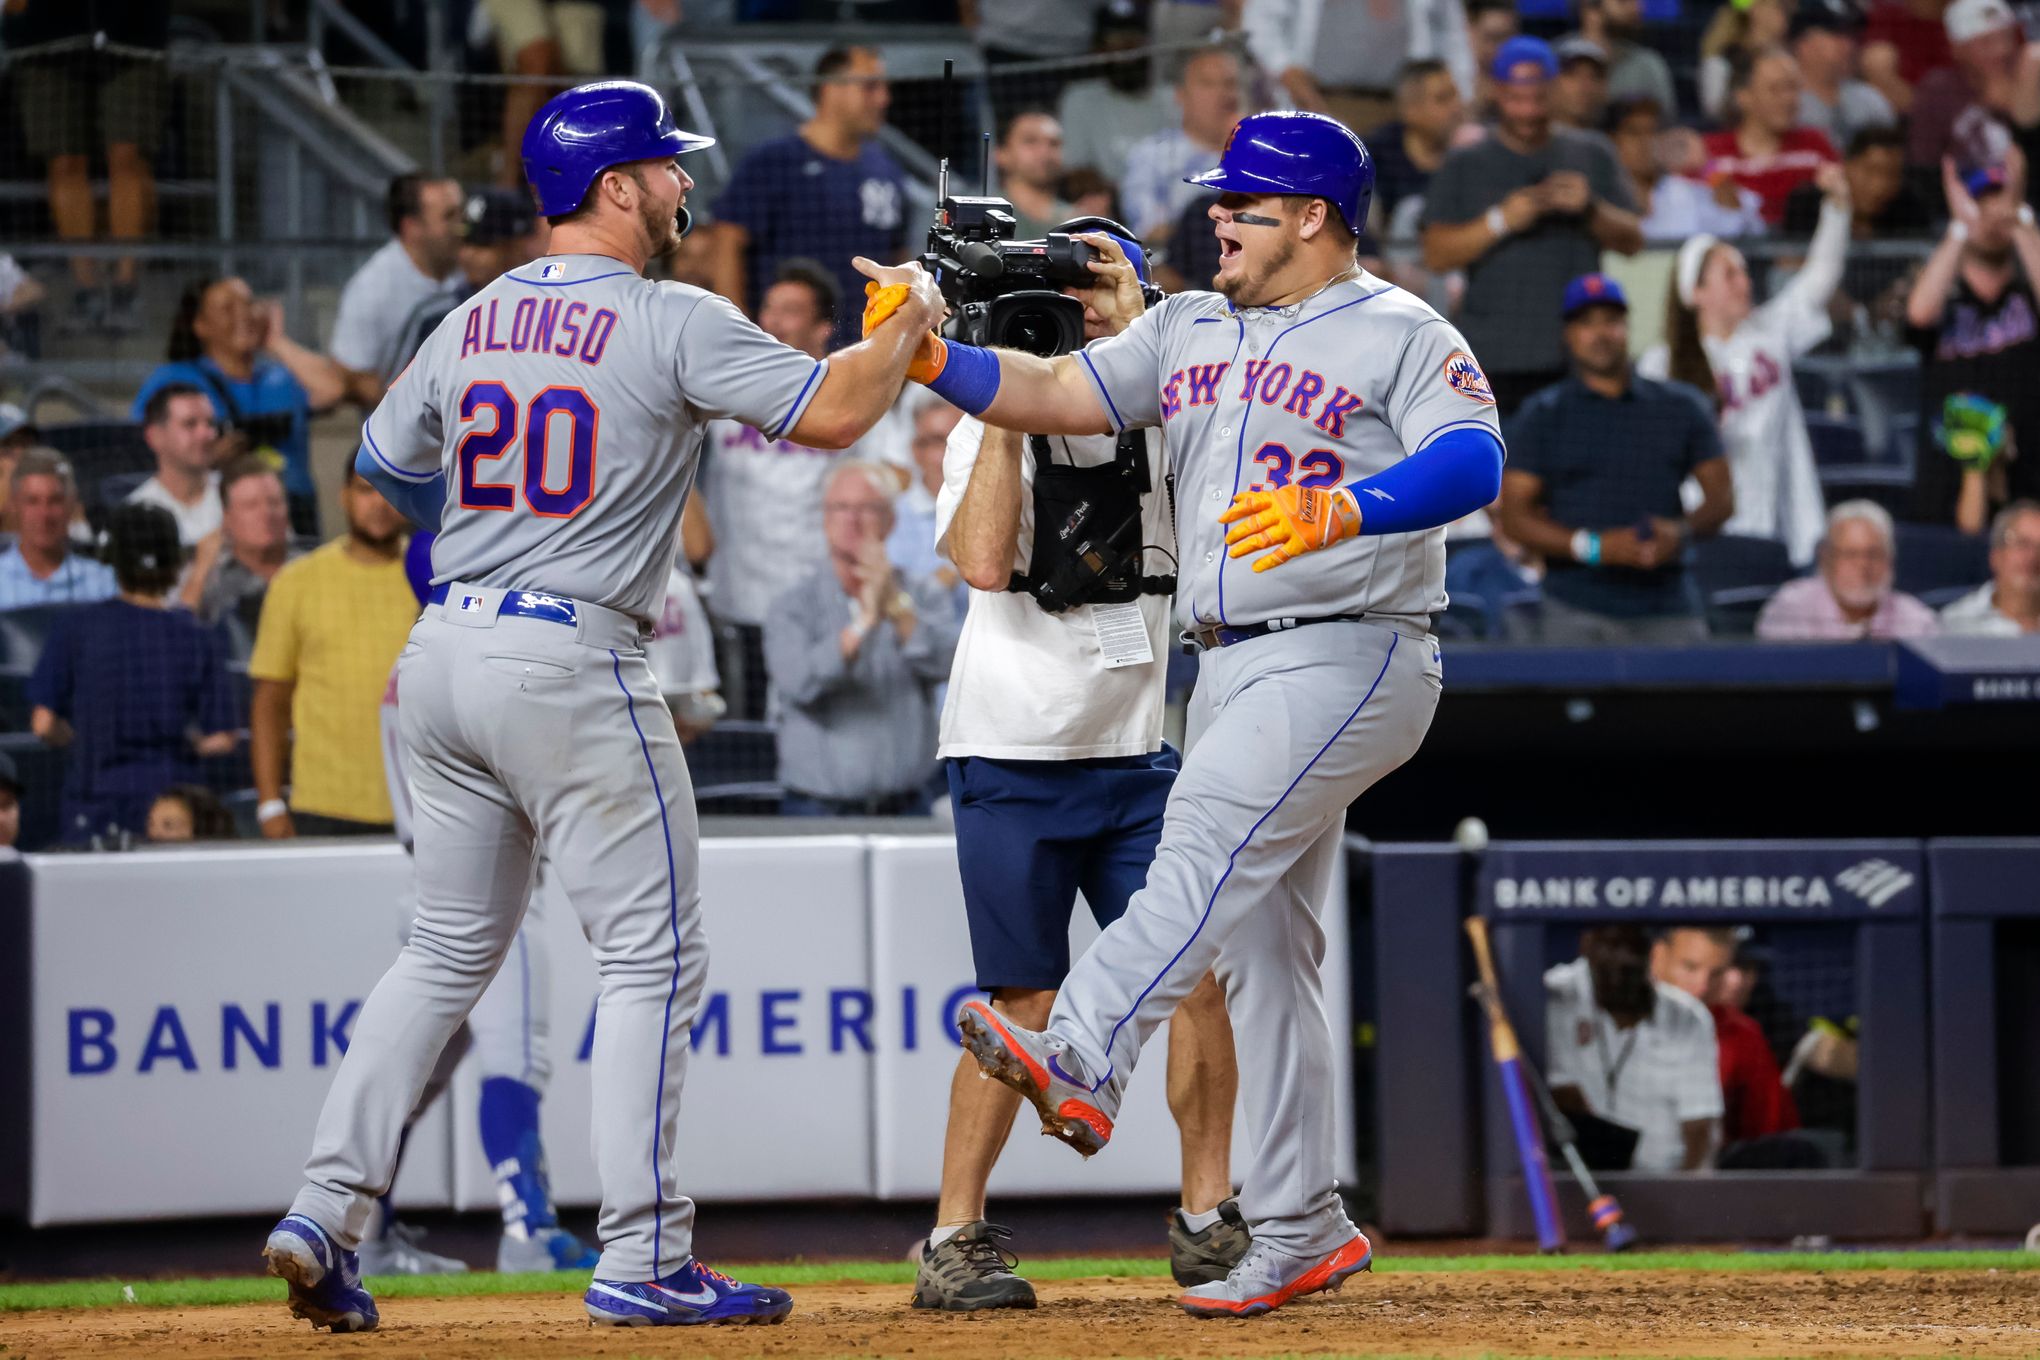 Daniel Vogelbach raves about atmosphere during Mets debut